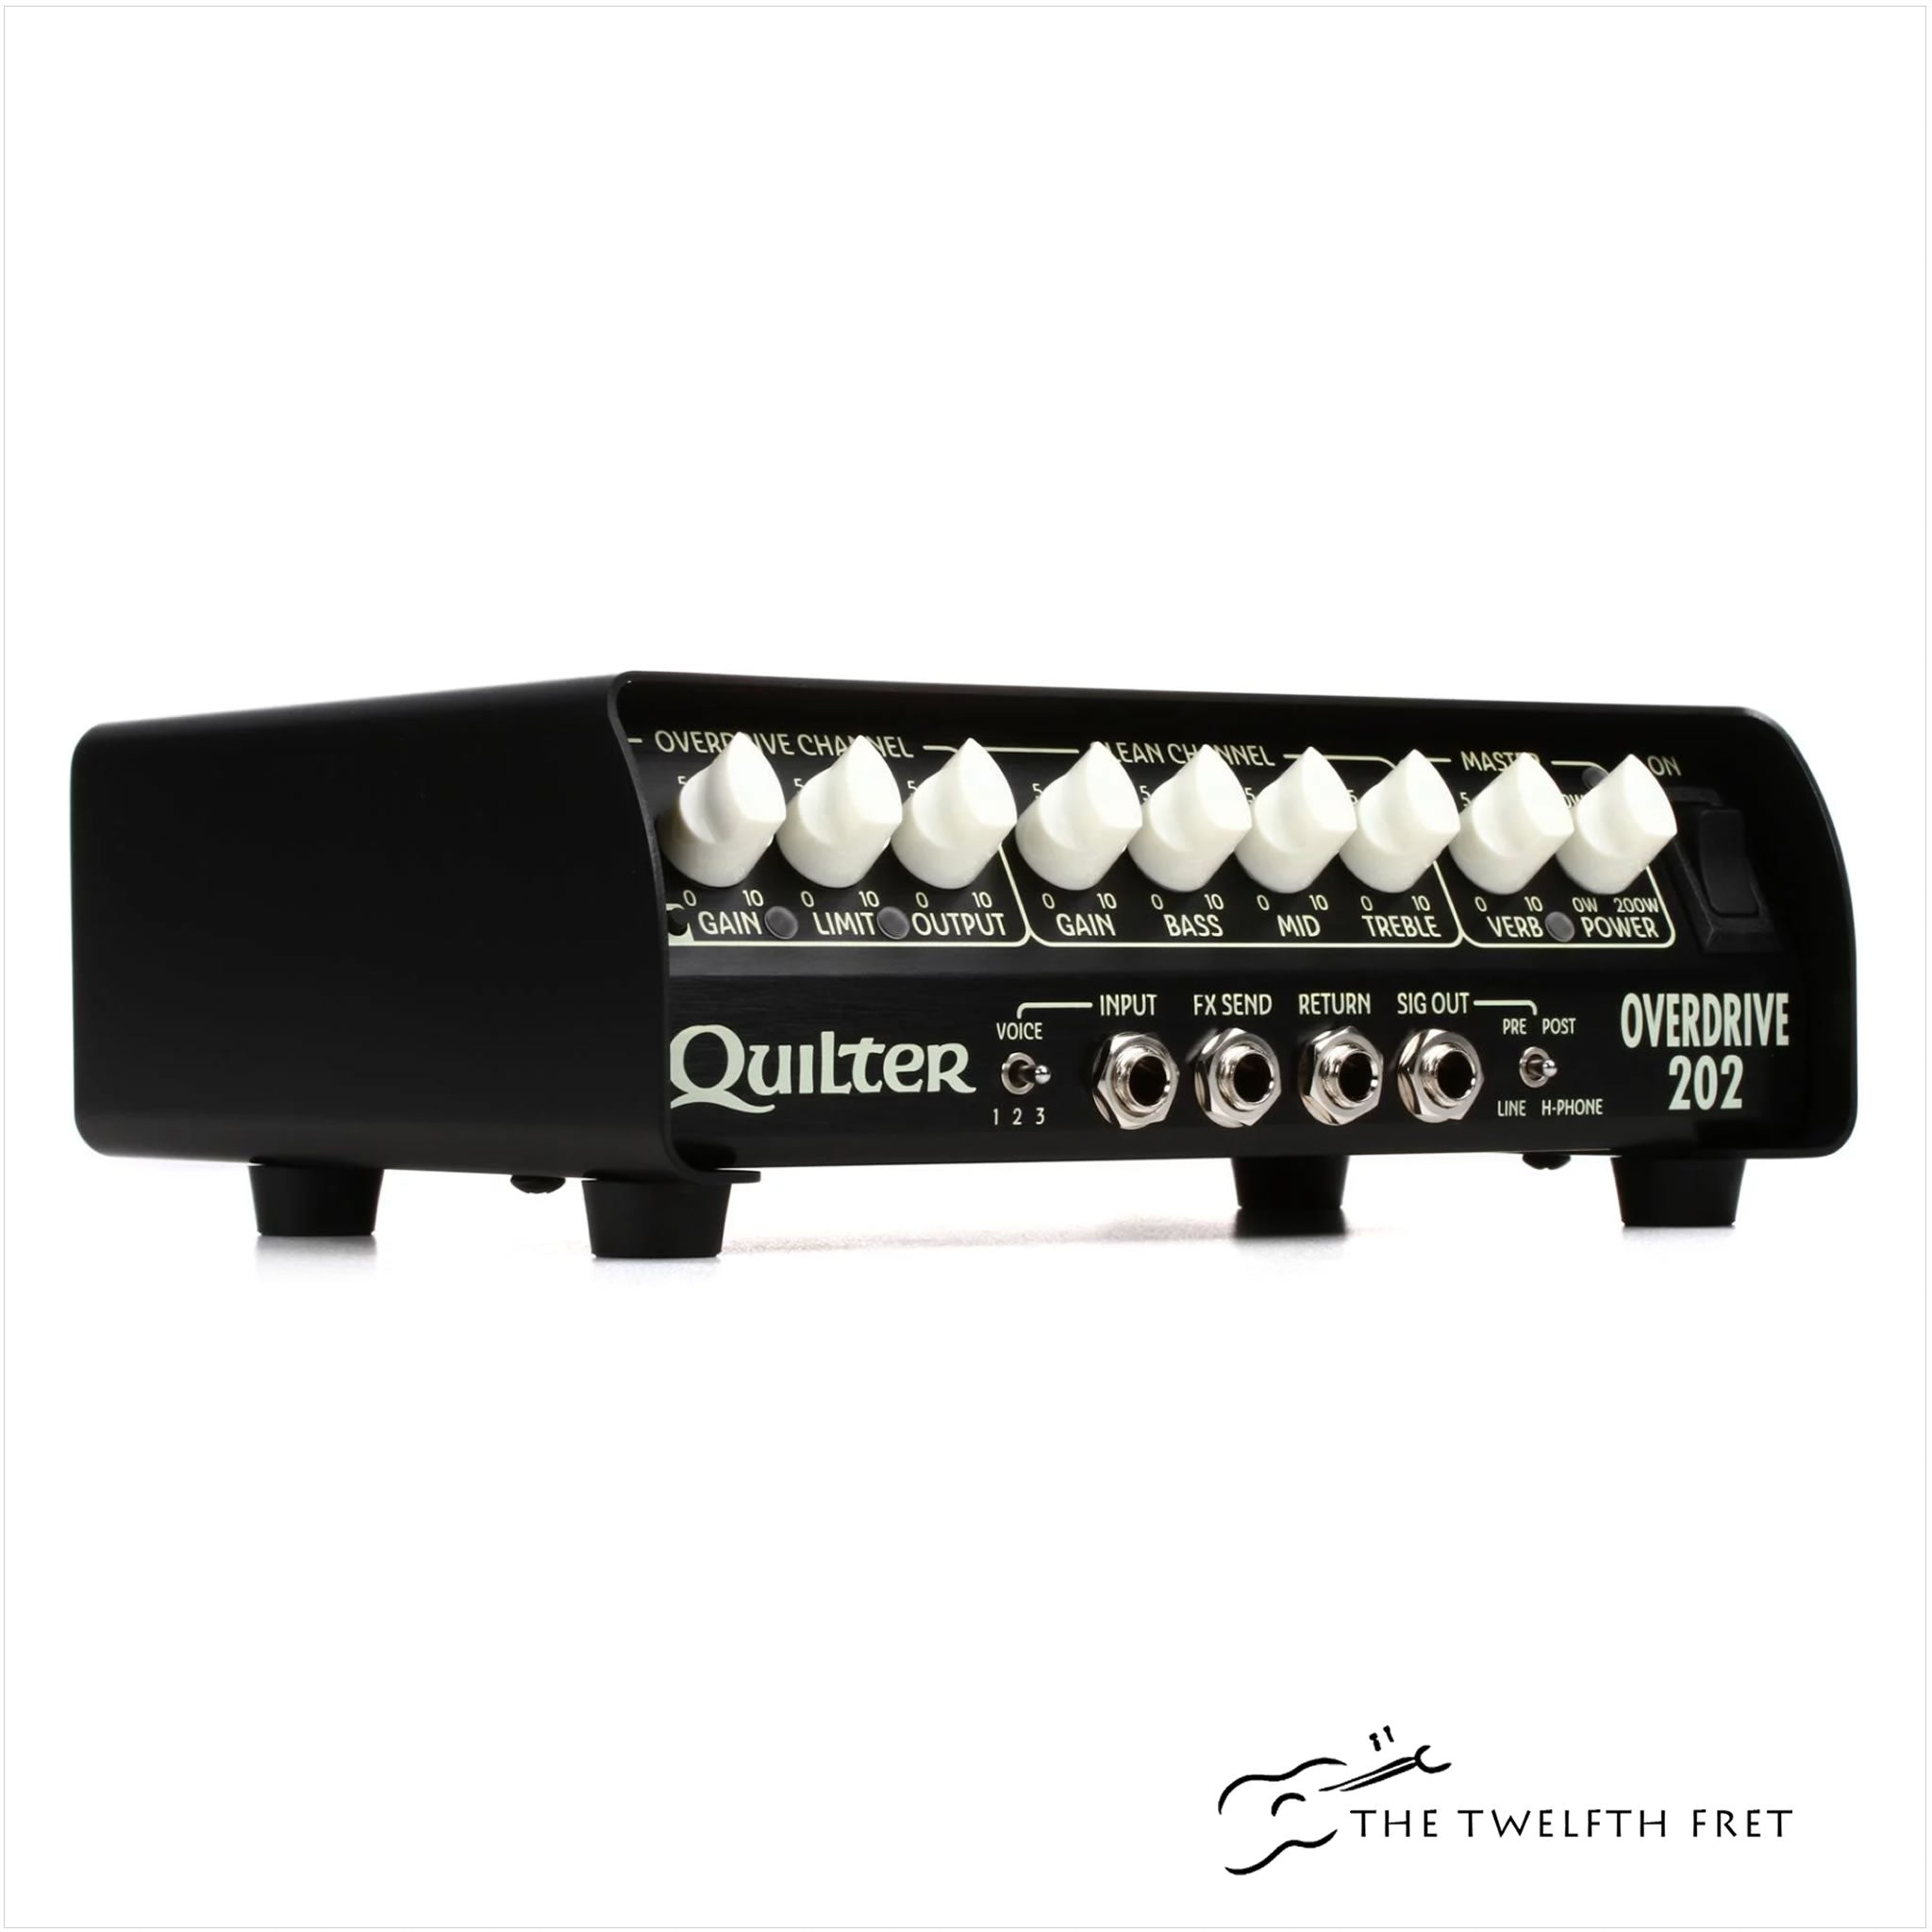 Quilter Labs Overdrive 202 Amp Head - The Twelfth Fret